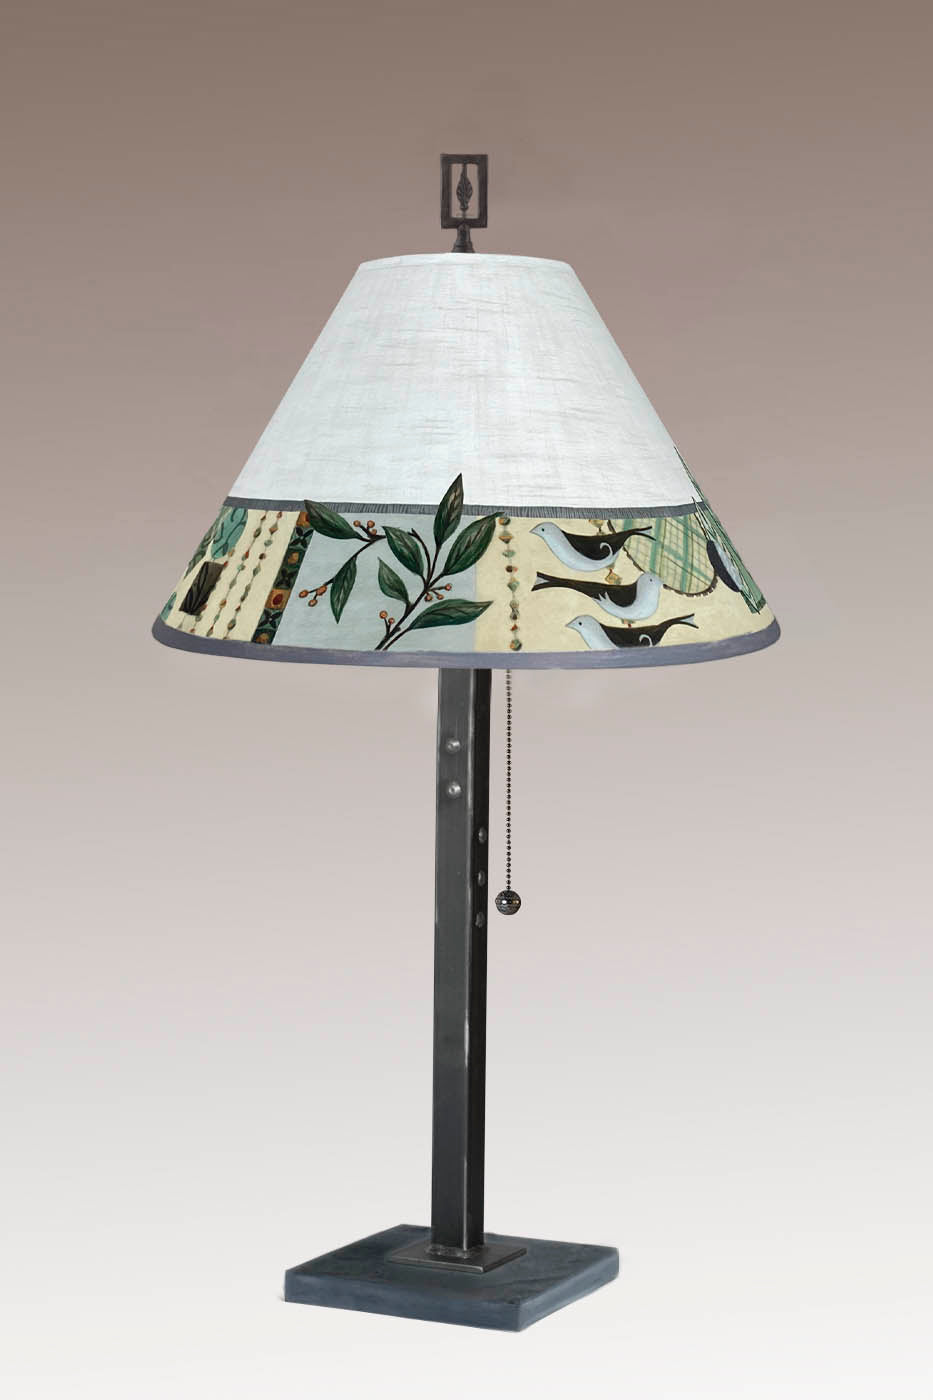 Janna Ugone & Co Table Lamp Steel Table Lamp with Medium Conical Shade in New Capri Opal